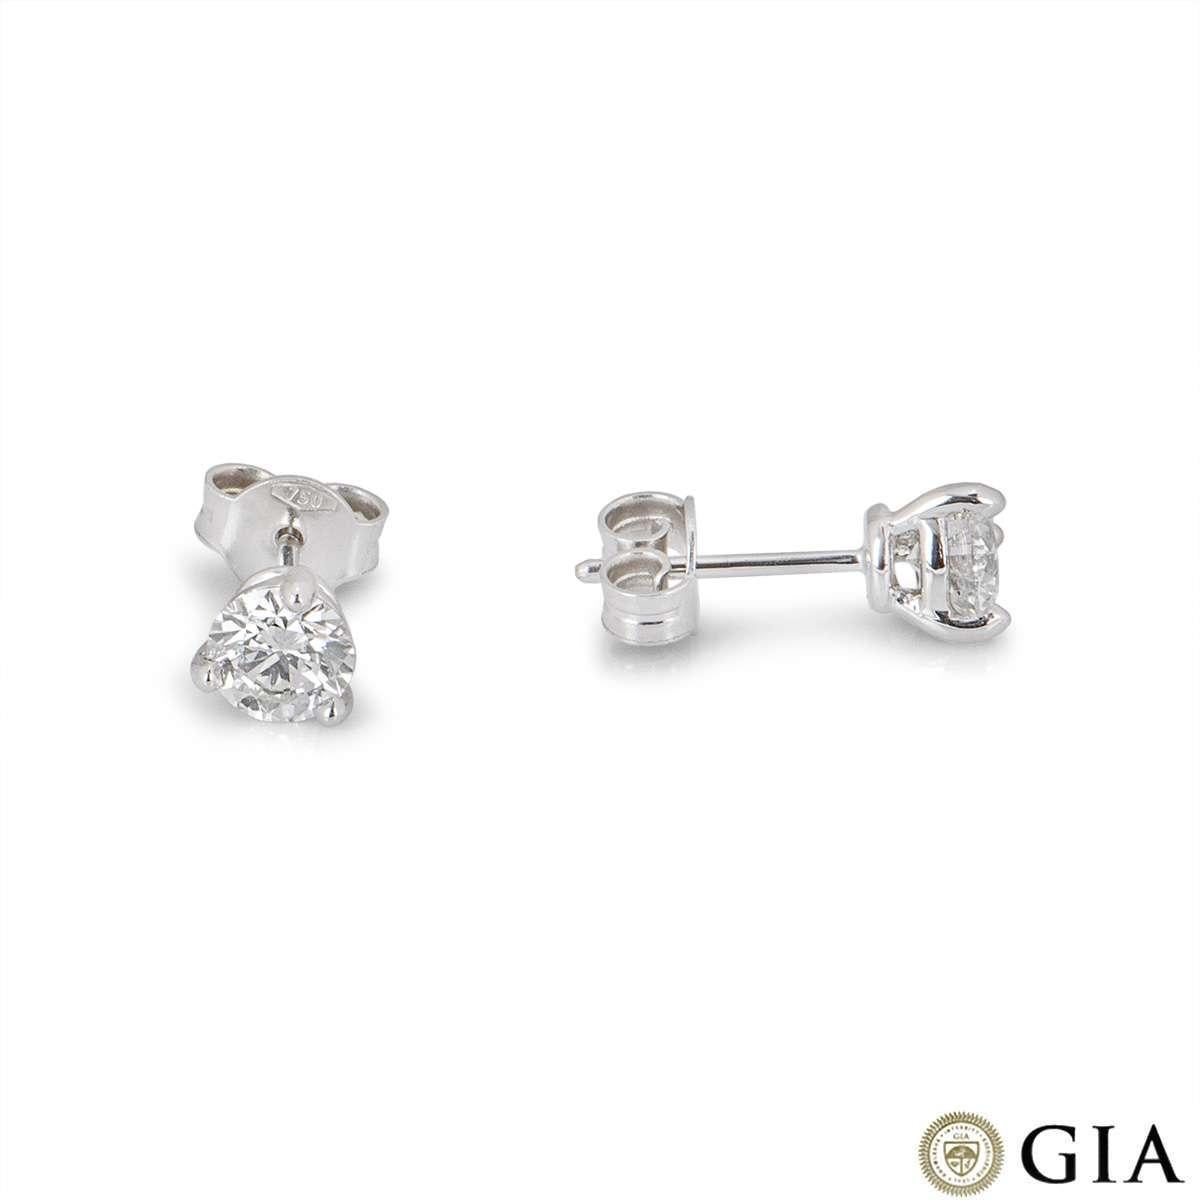 GIA Certified Round Brilliant Cut Diamond Earrings 1.07 Carat For Sale at  1stDibs